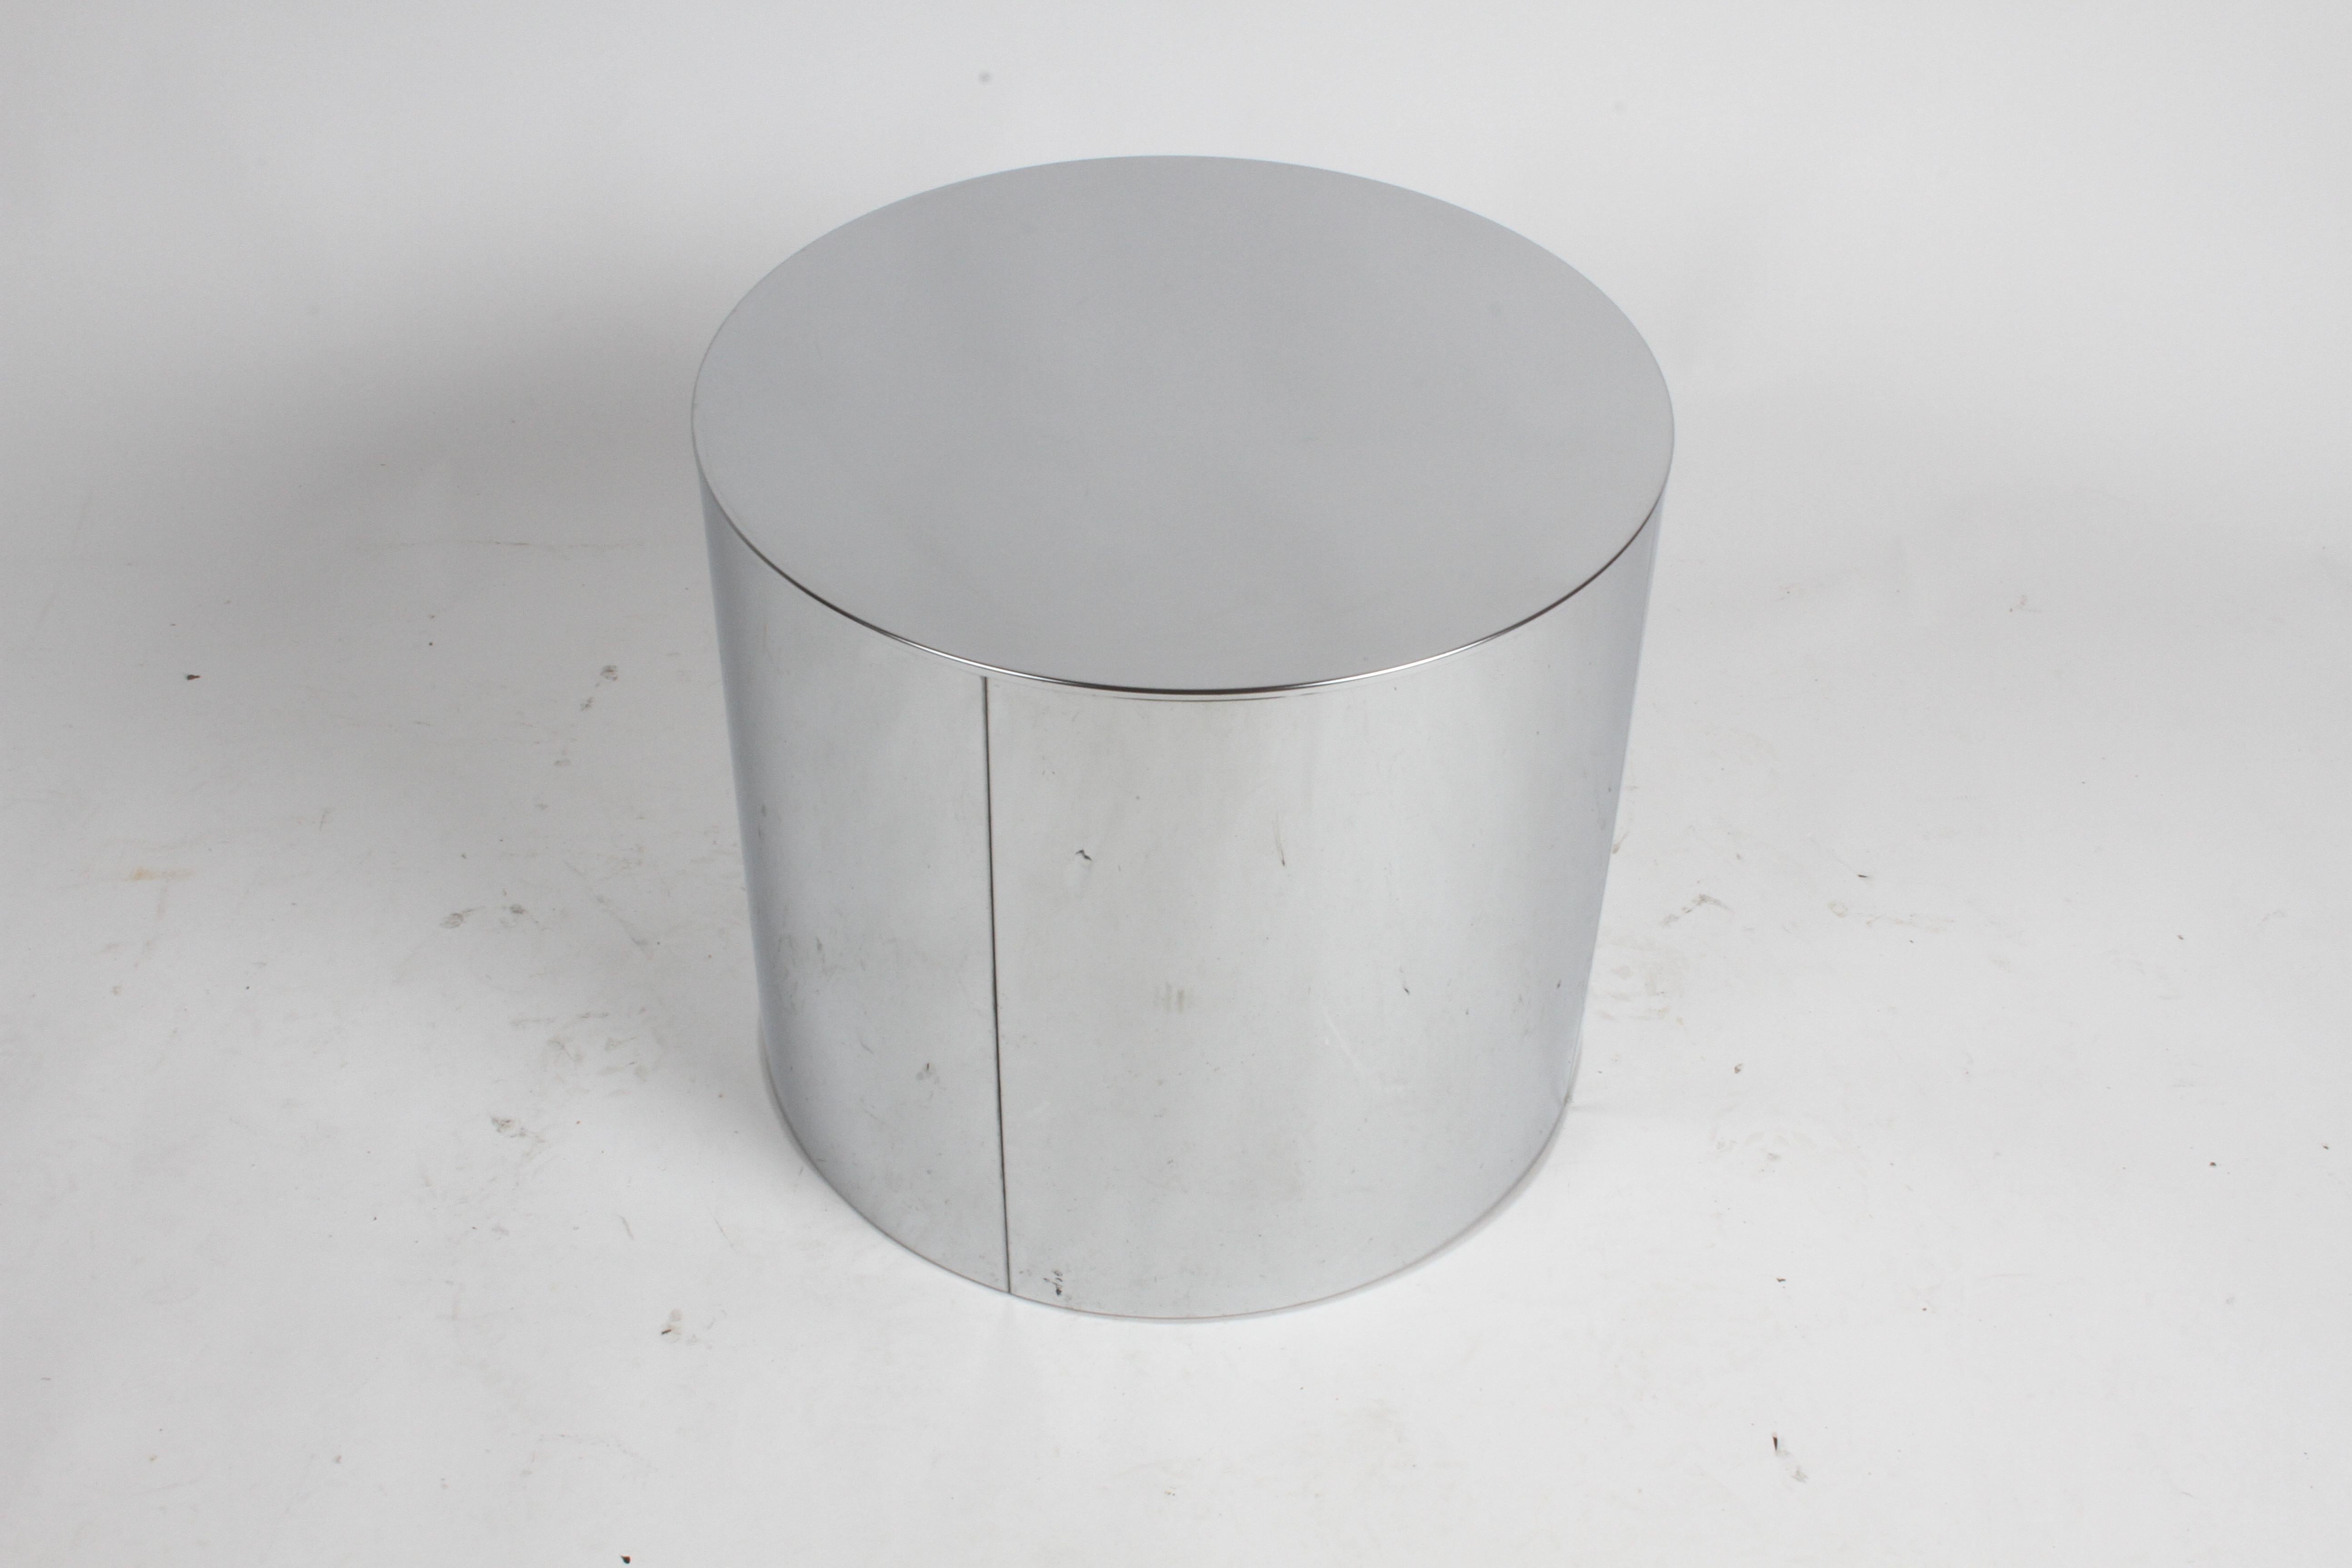 Hollywood Regency Curtis Jeré Chrome drum form end, side table or display pedestal. Signed C. Jere, circa 1970s. Wear to finish on tops, some patina on sides, minor dings, metal is reflective, so it picked up at lot flaws on the paper and projected